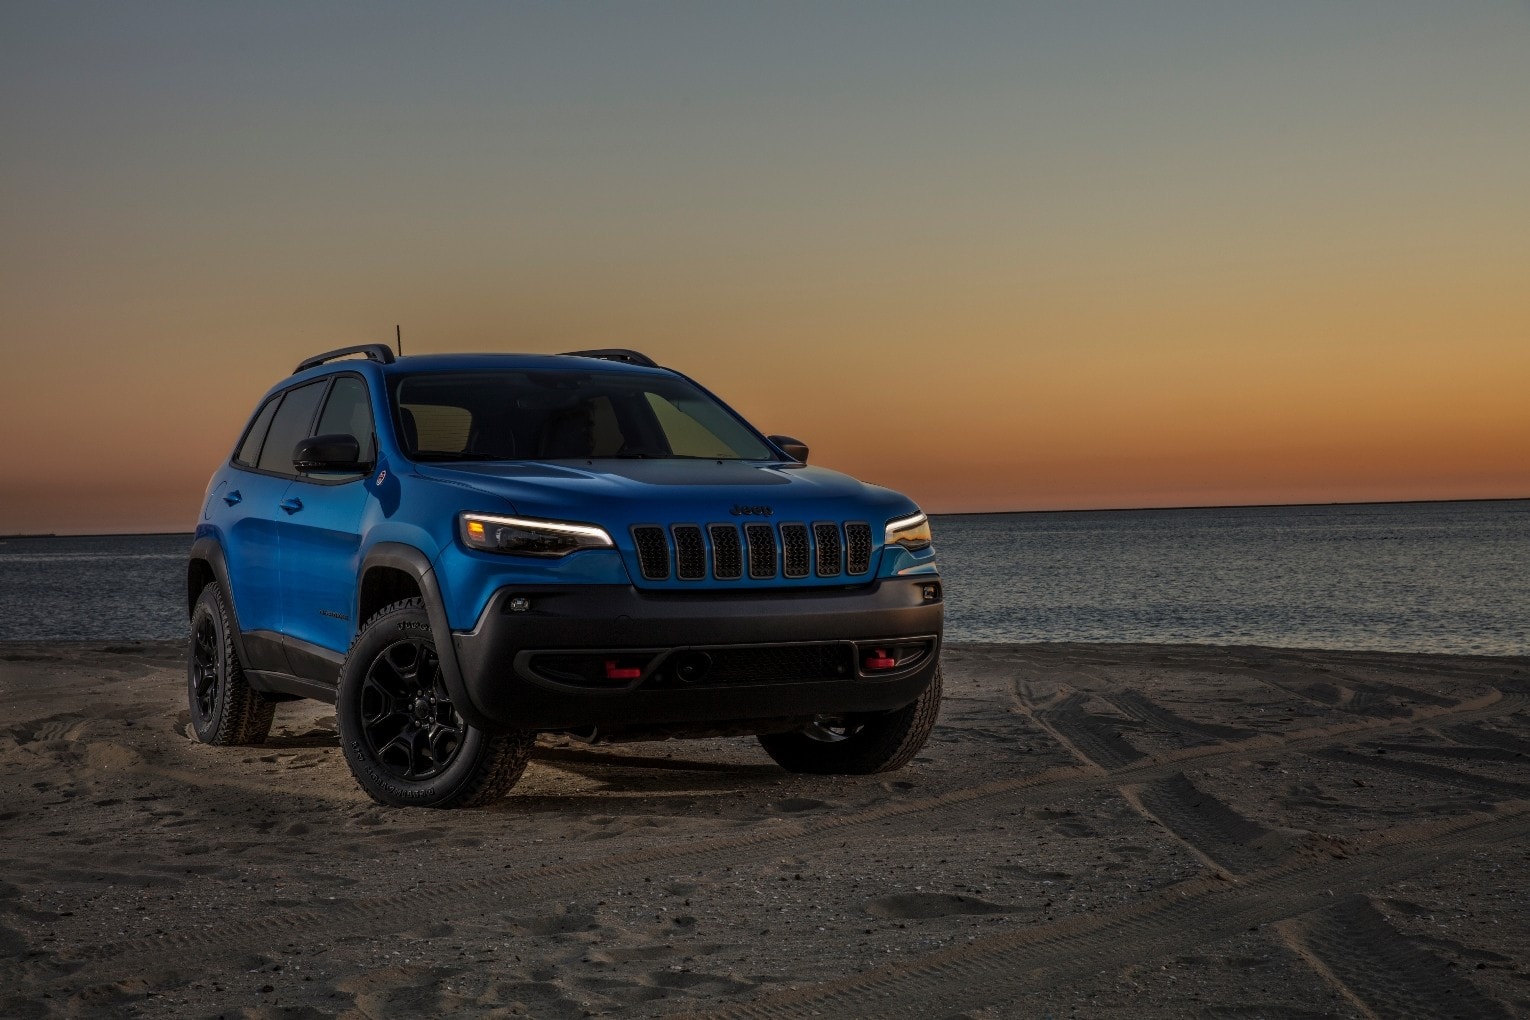 New-Gen Jeep Compass Confirmed For 2025 With Big Updates